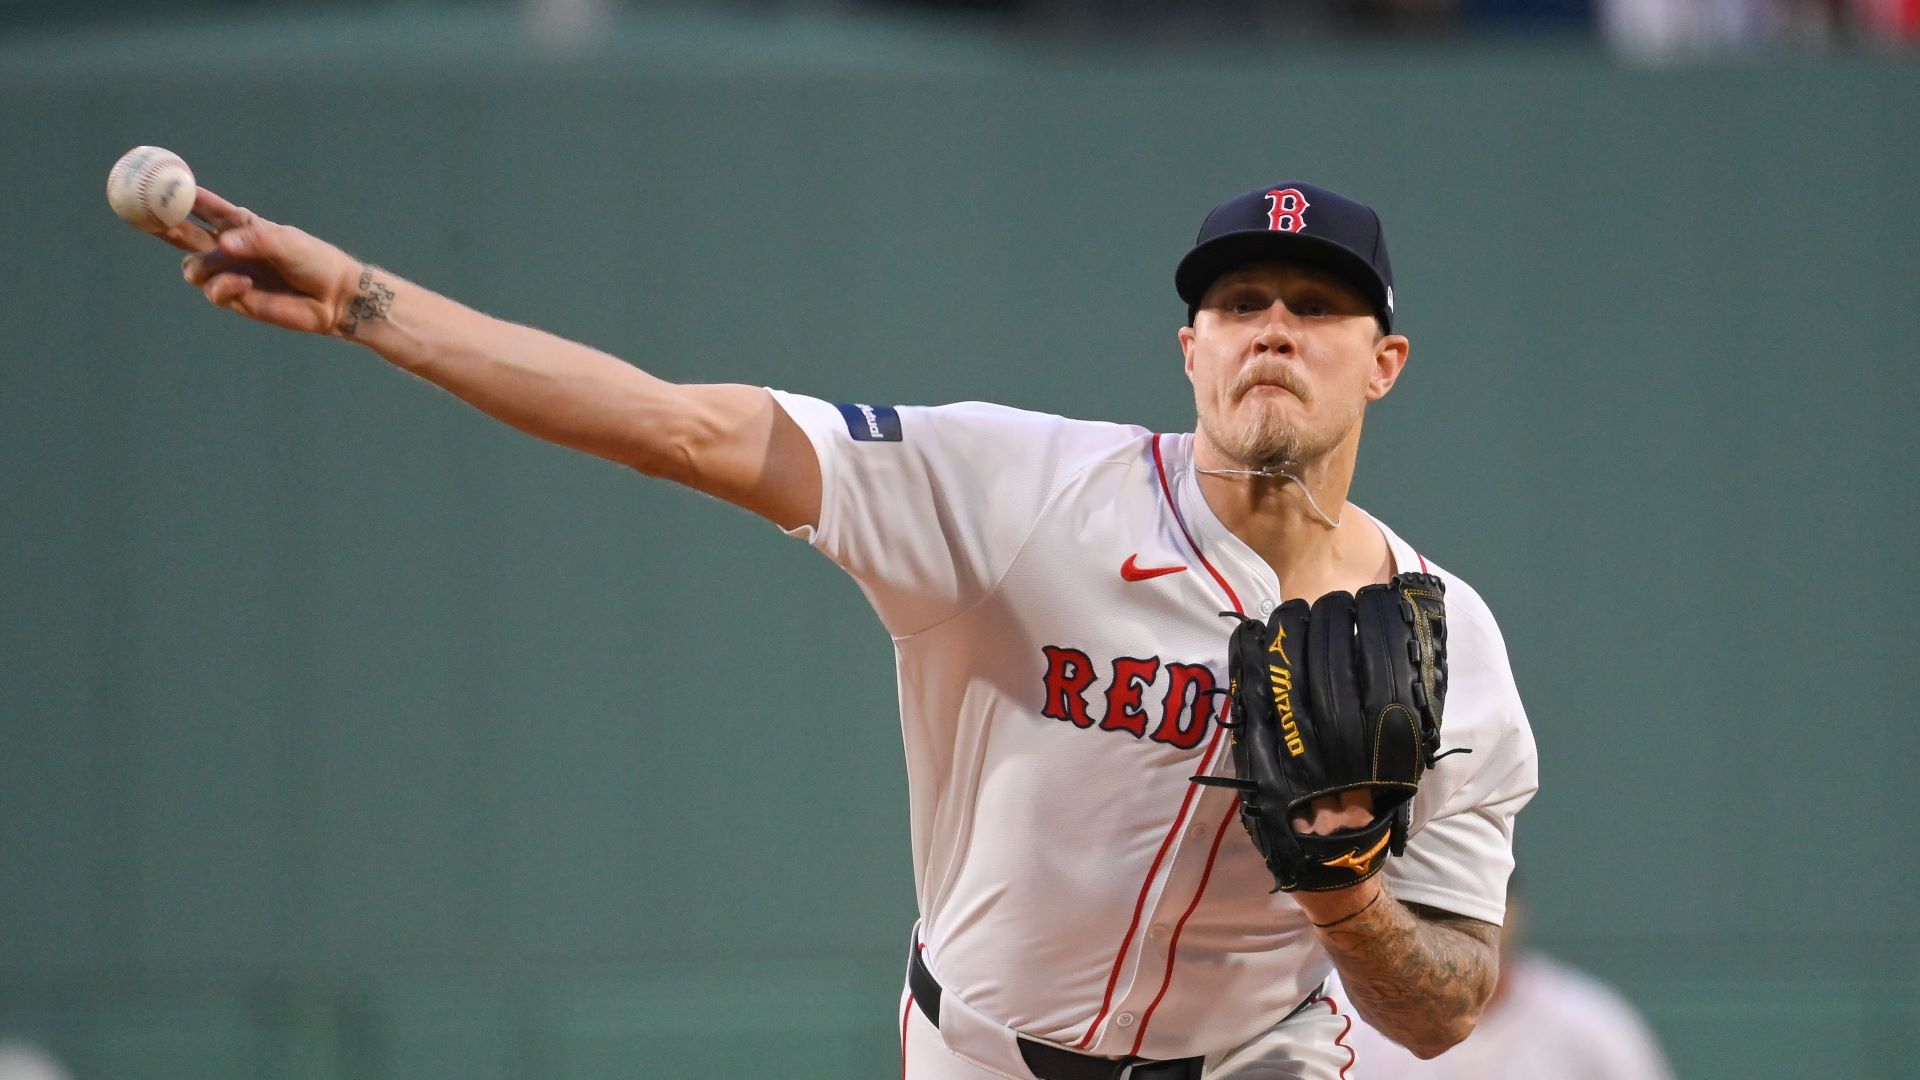 Red Sox Notes: Tanner Houck Felt He Could ‘Do No Wrong’ In Stellar
Start